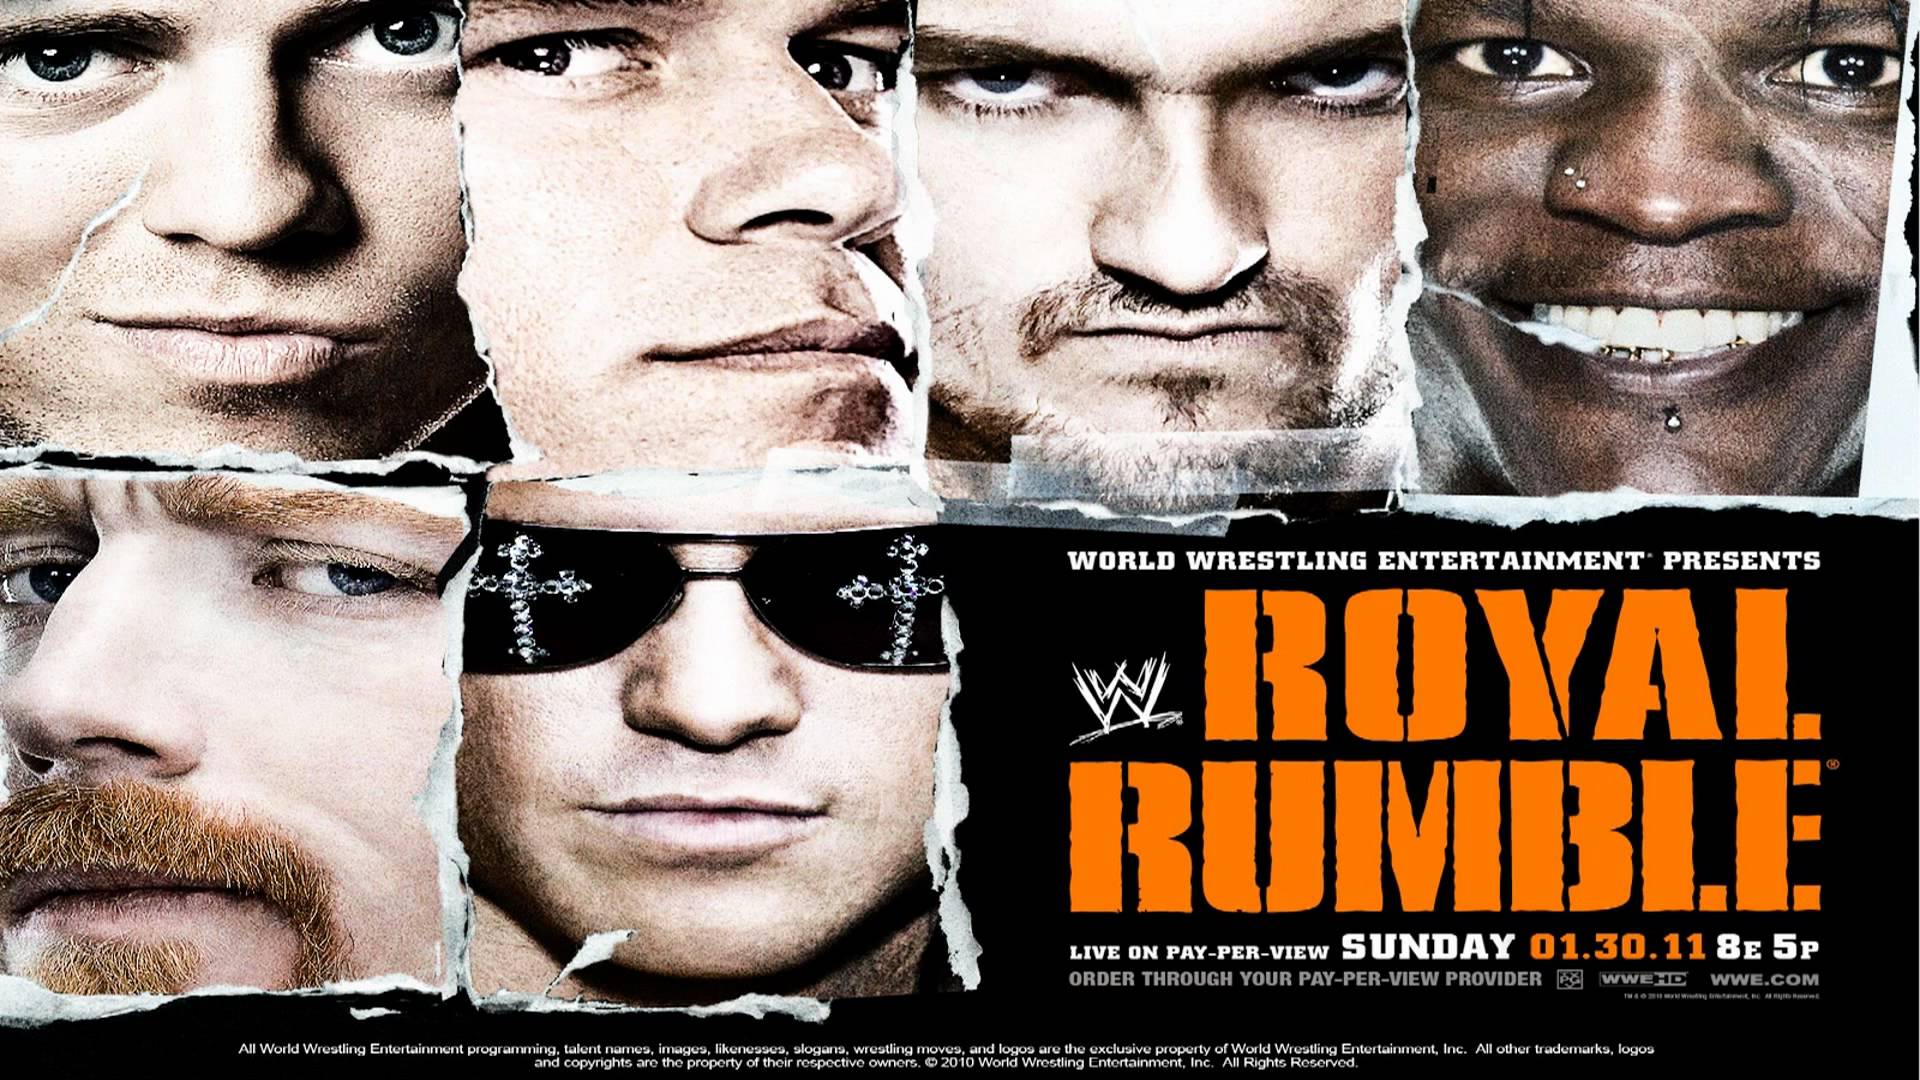 WWE: Royal Rumble 2011 Theme Song In A Dream